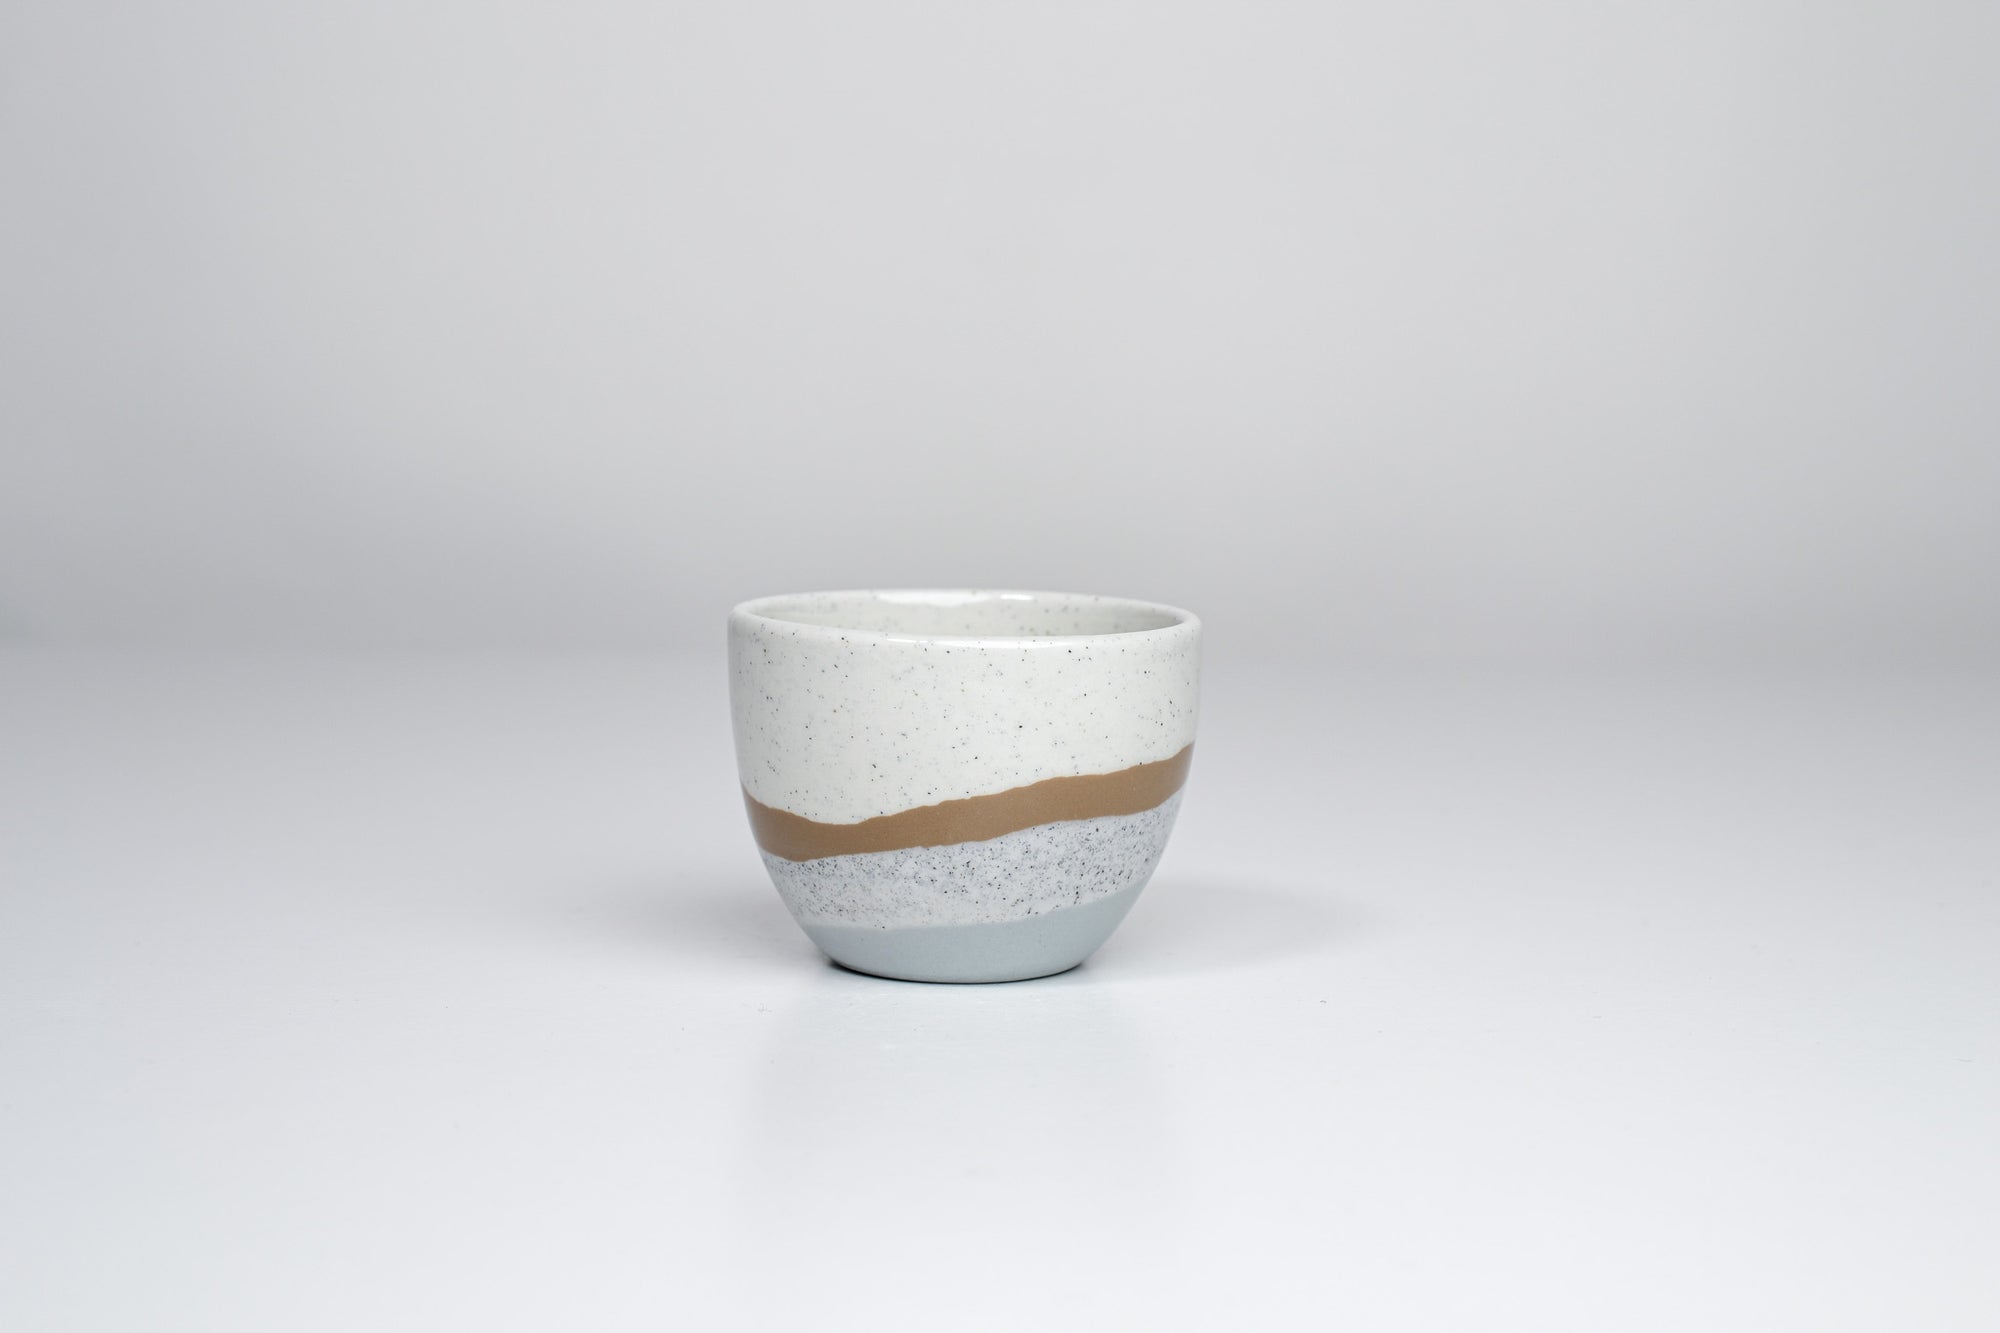 Simple cup, winter vibes with Amairo